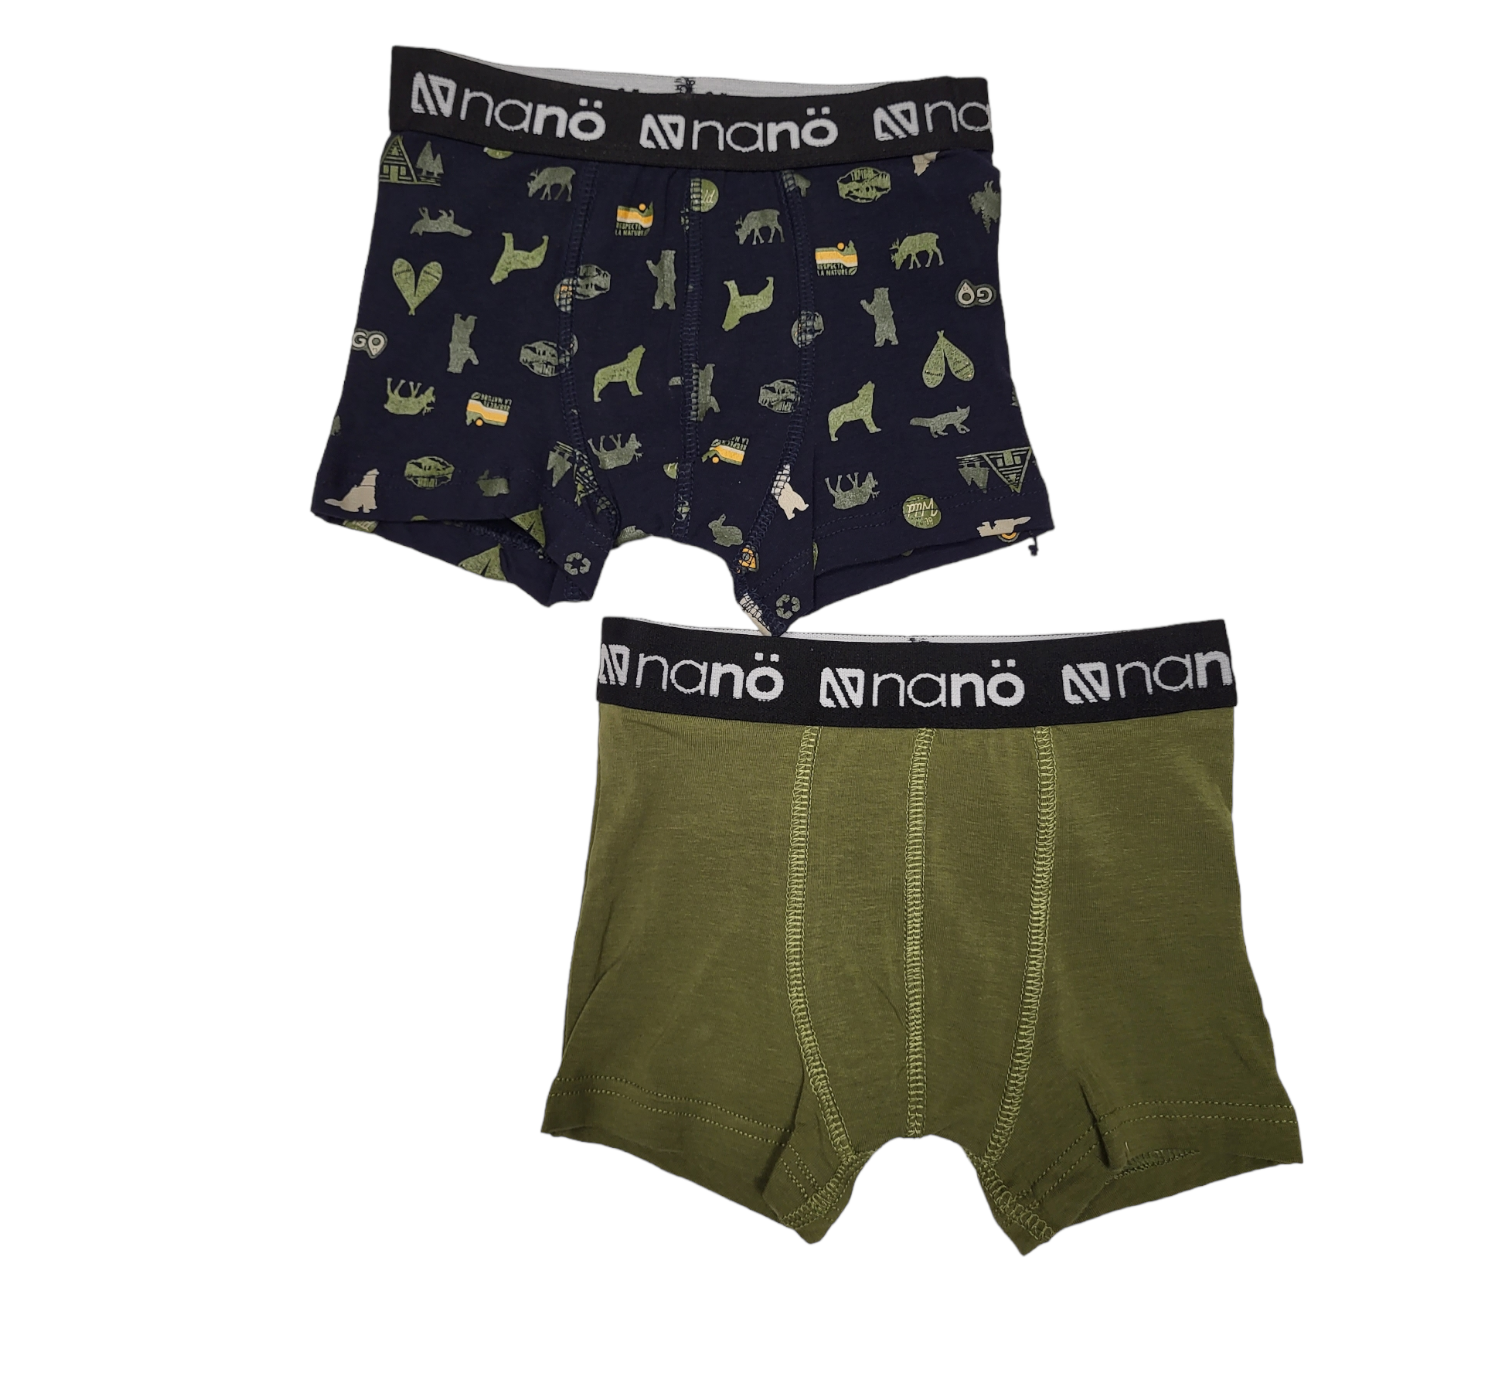 Boys Camping Boxers - Set of 2